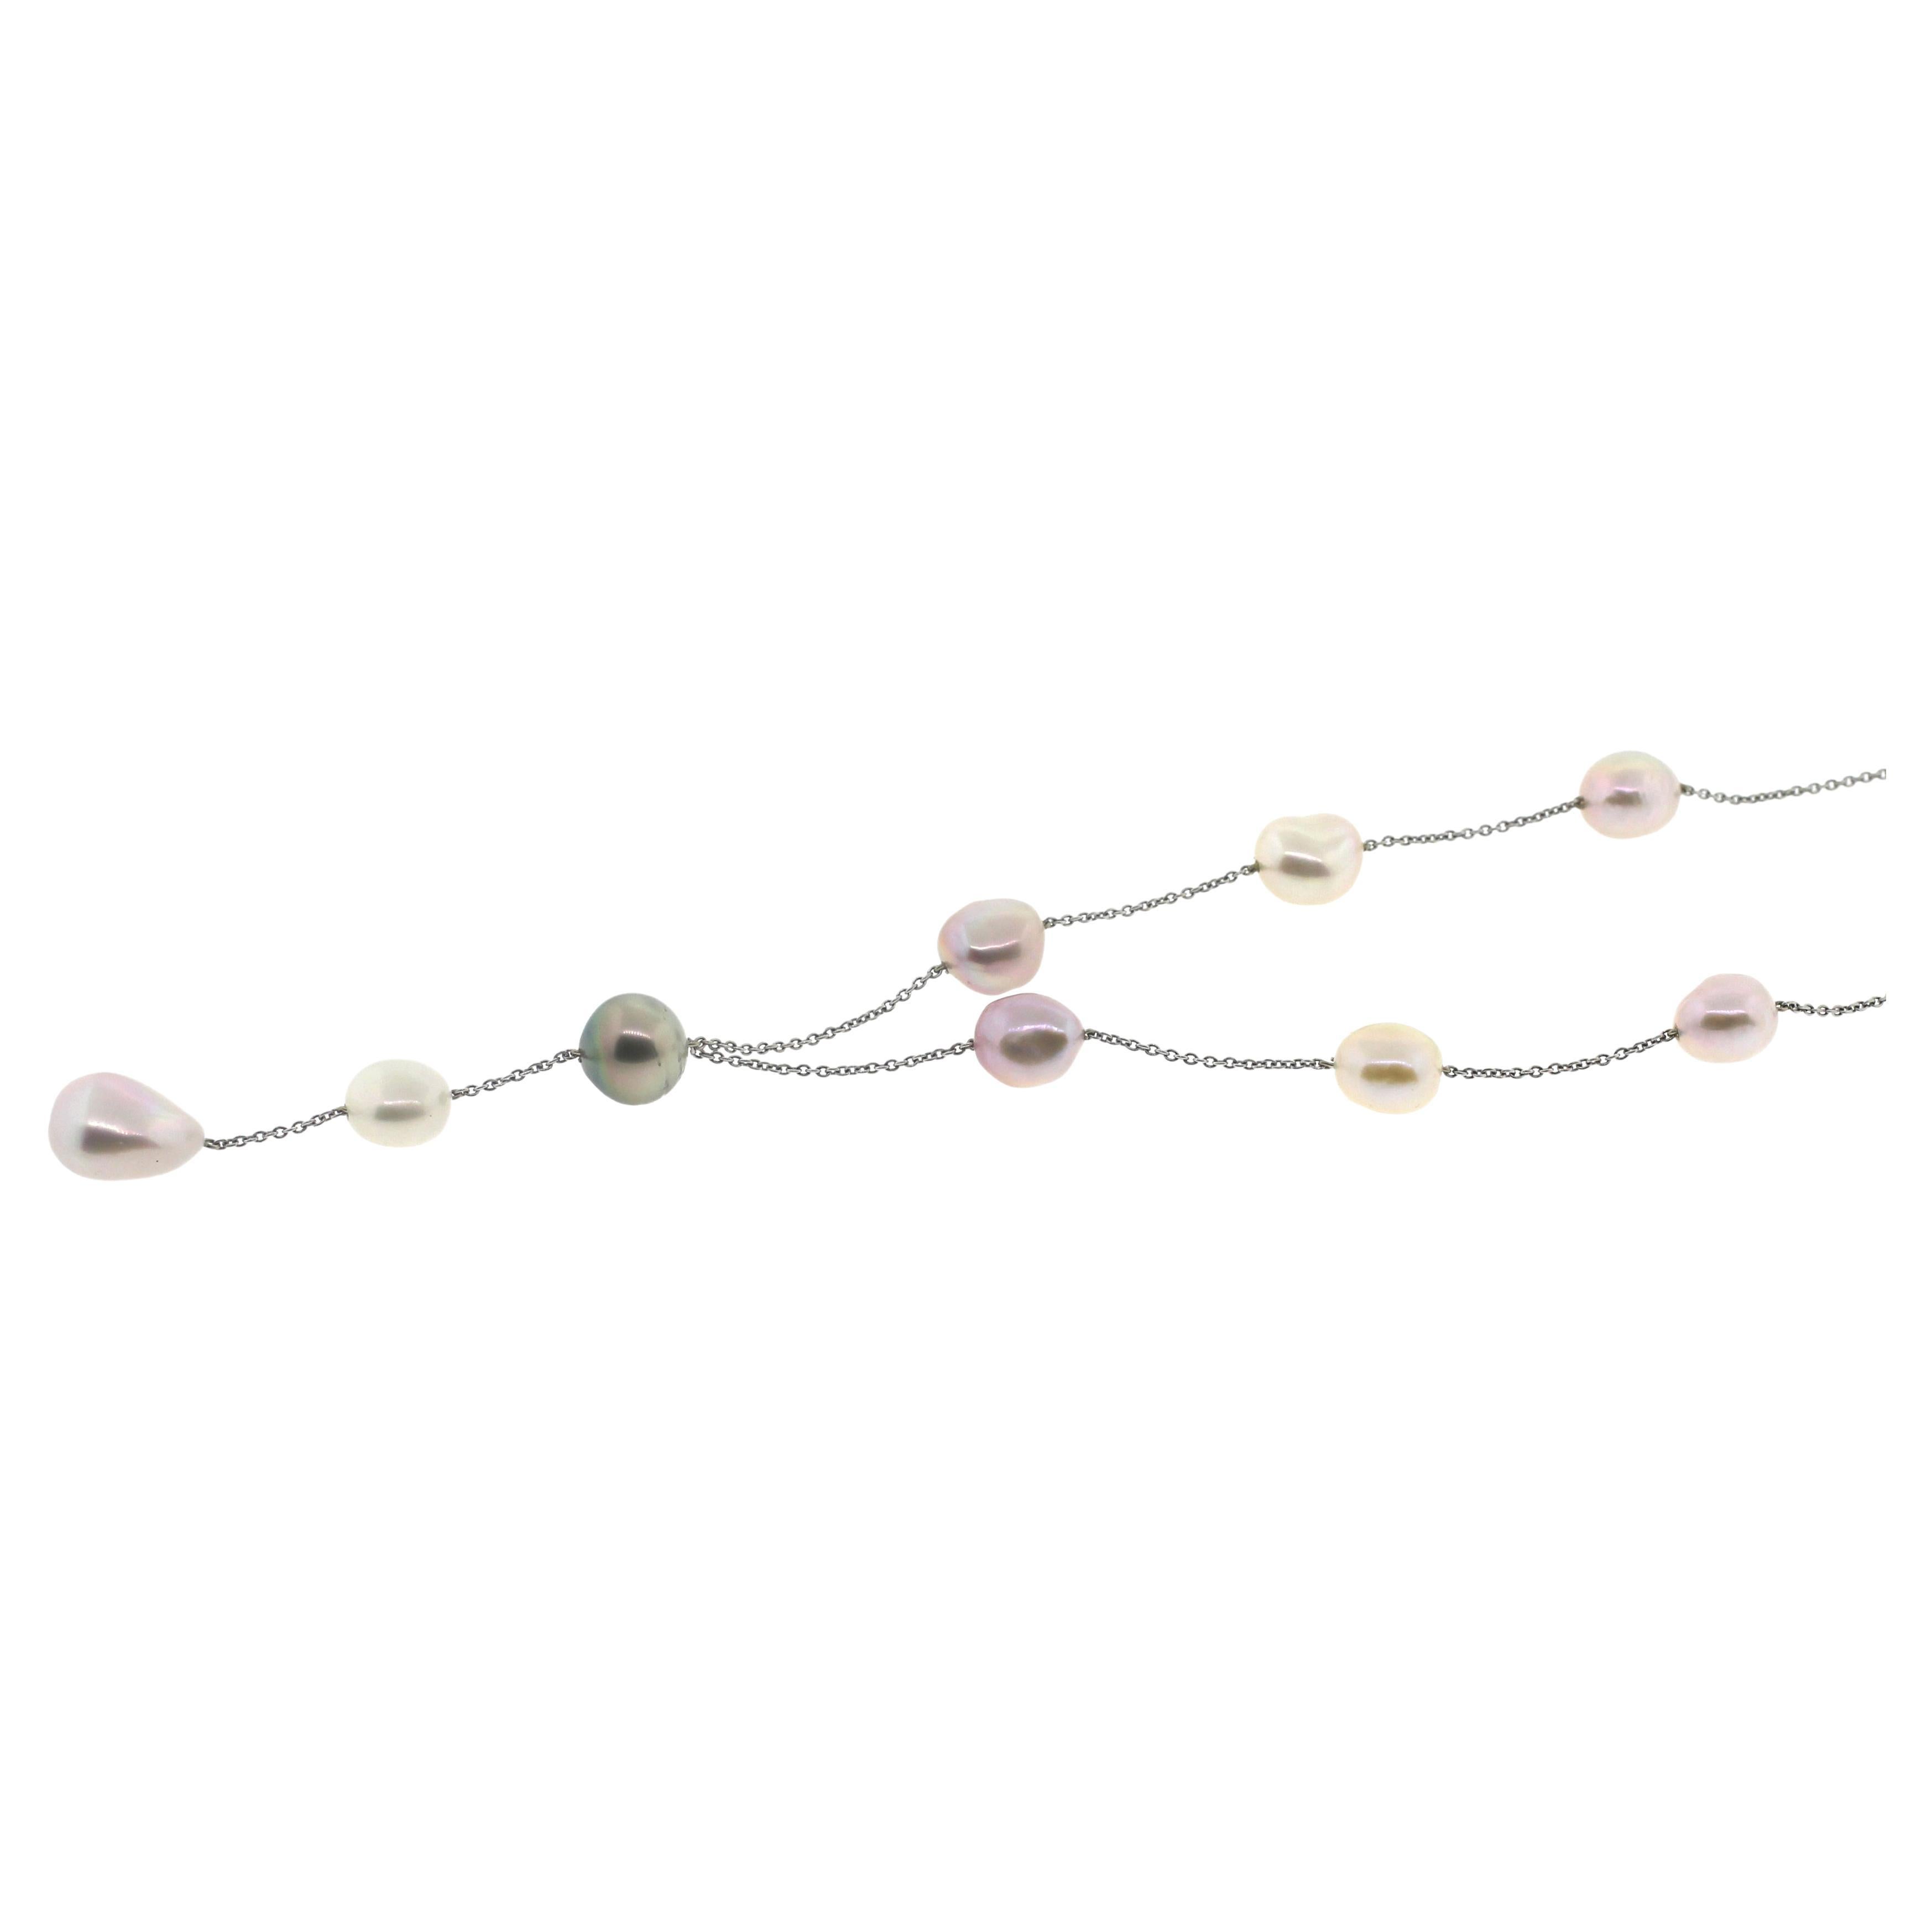 Women's Hakimoto 18K White Gold Chain With Tahiti and 8 Baroque Pearl Necklace